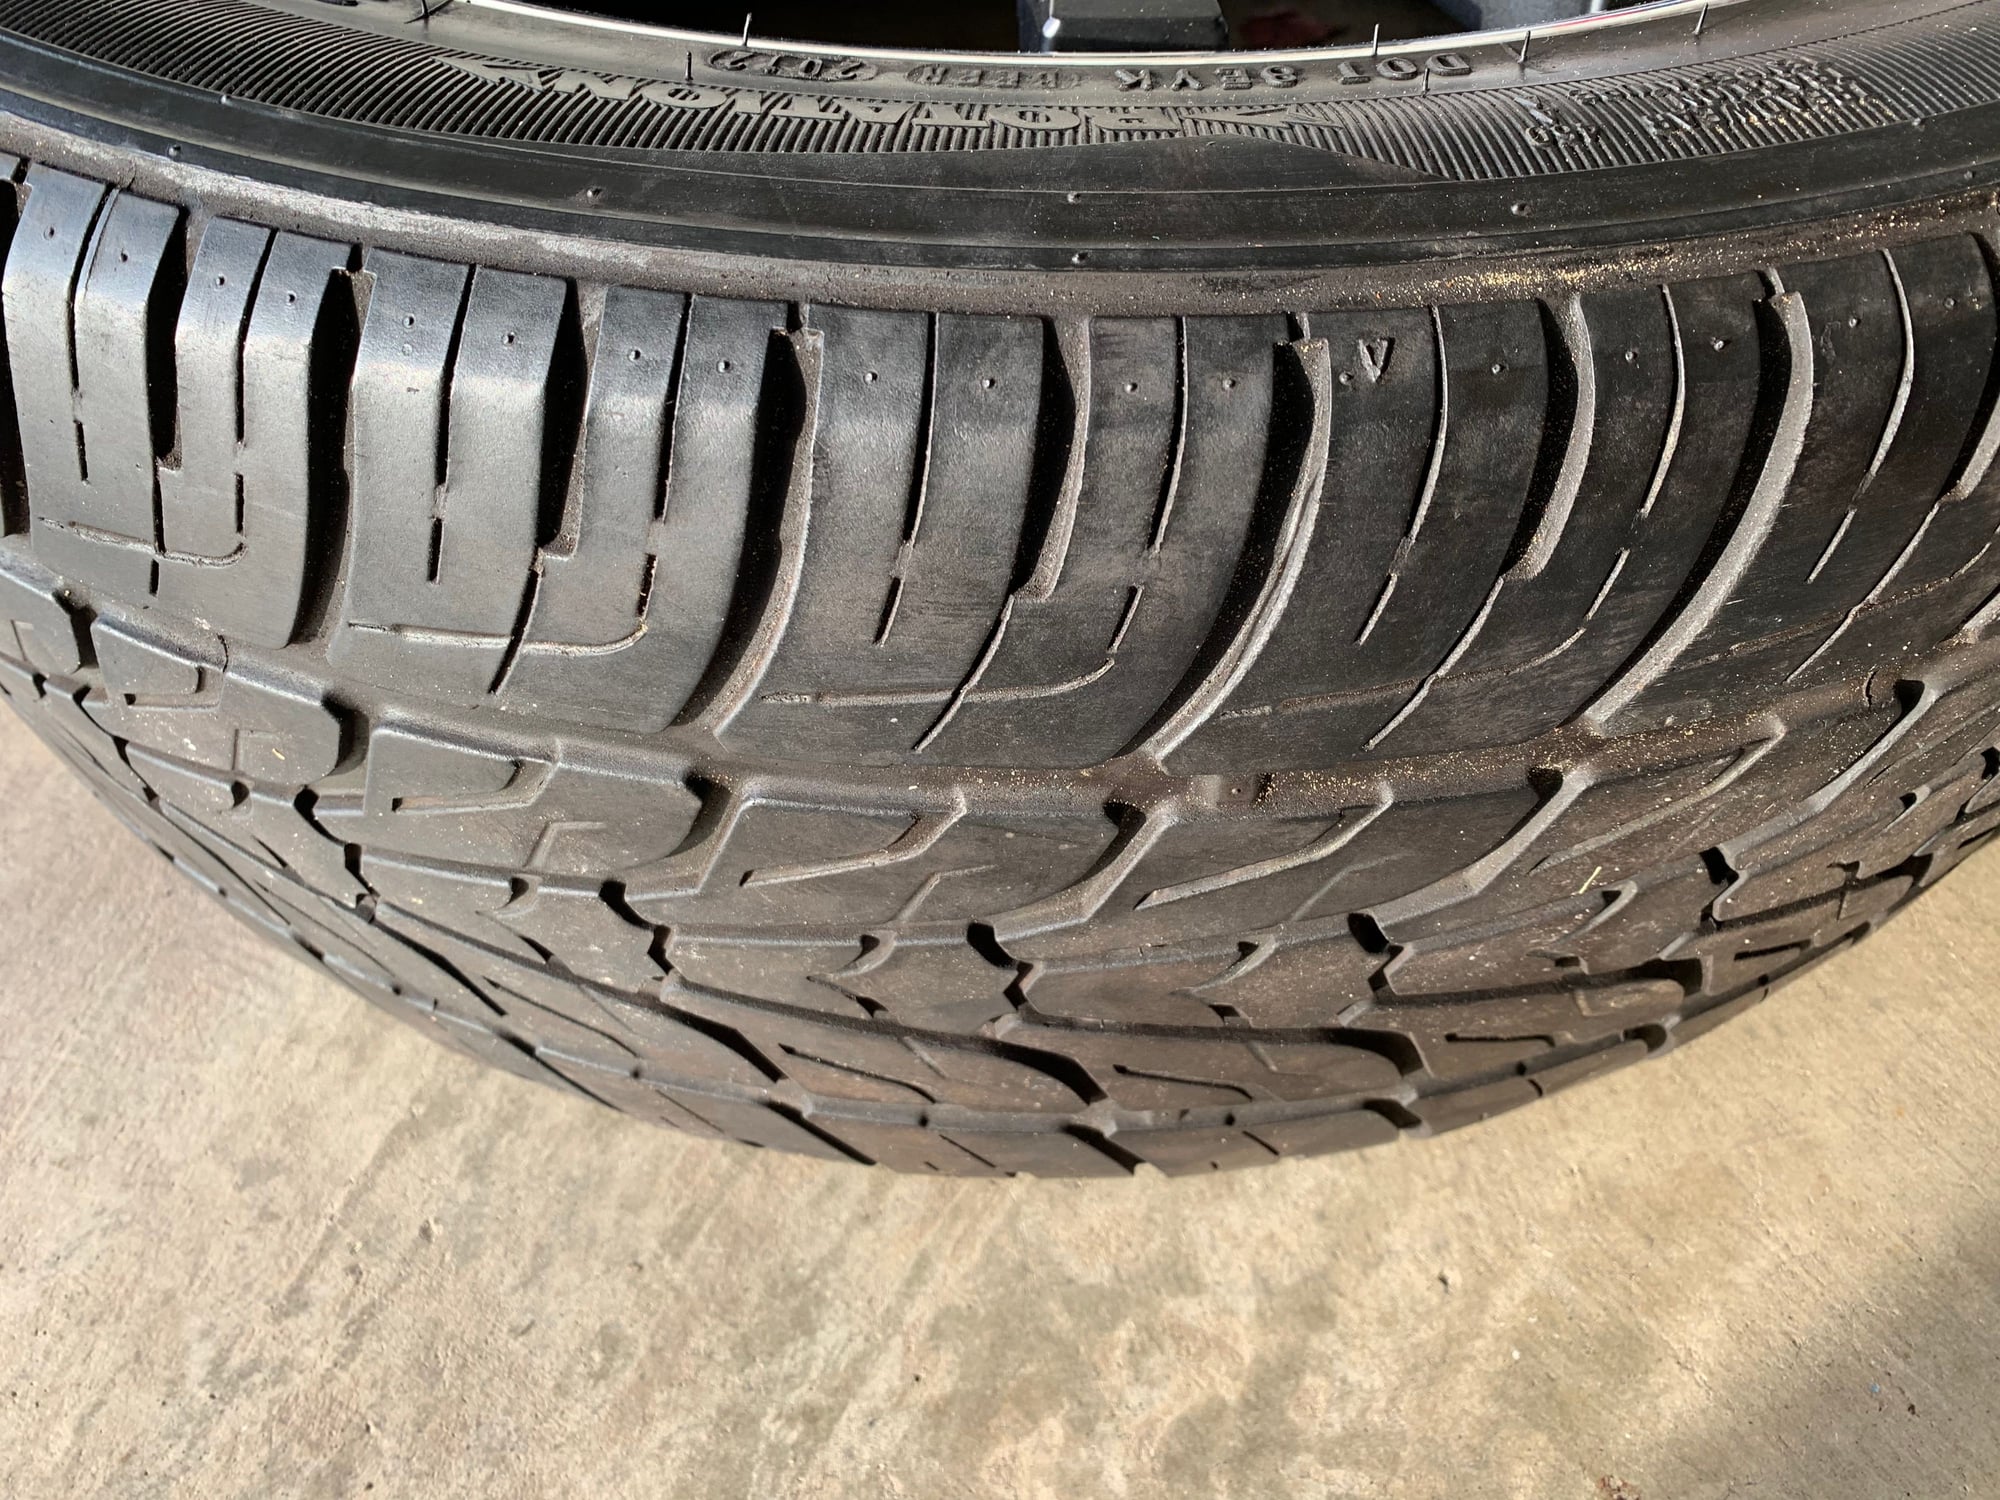 Wheels and Tires/Axles - Mercedes Benz GL450/GL550 22" Wheels/Rims with Tires - Niche Concourse (Matte Black) - Used - 2013 to 2019 Mercedes-Benz GL450 - Leesburg, VA 20176, United States